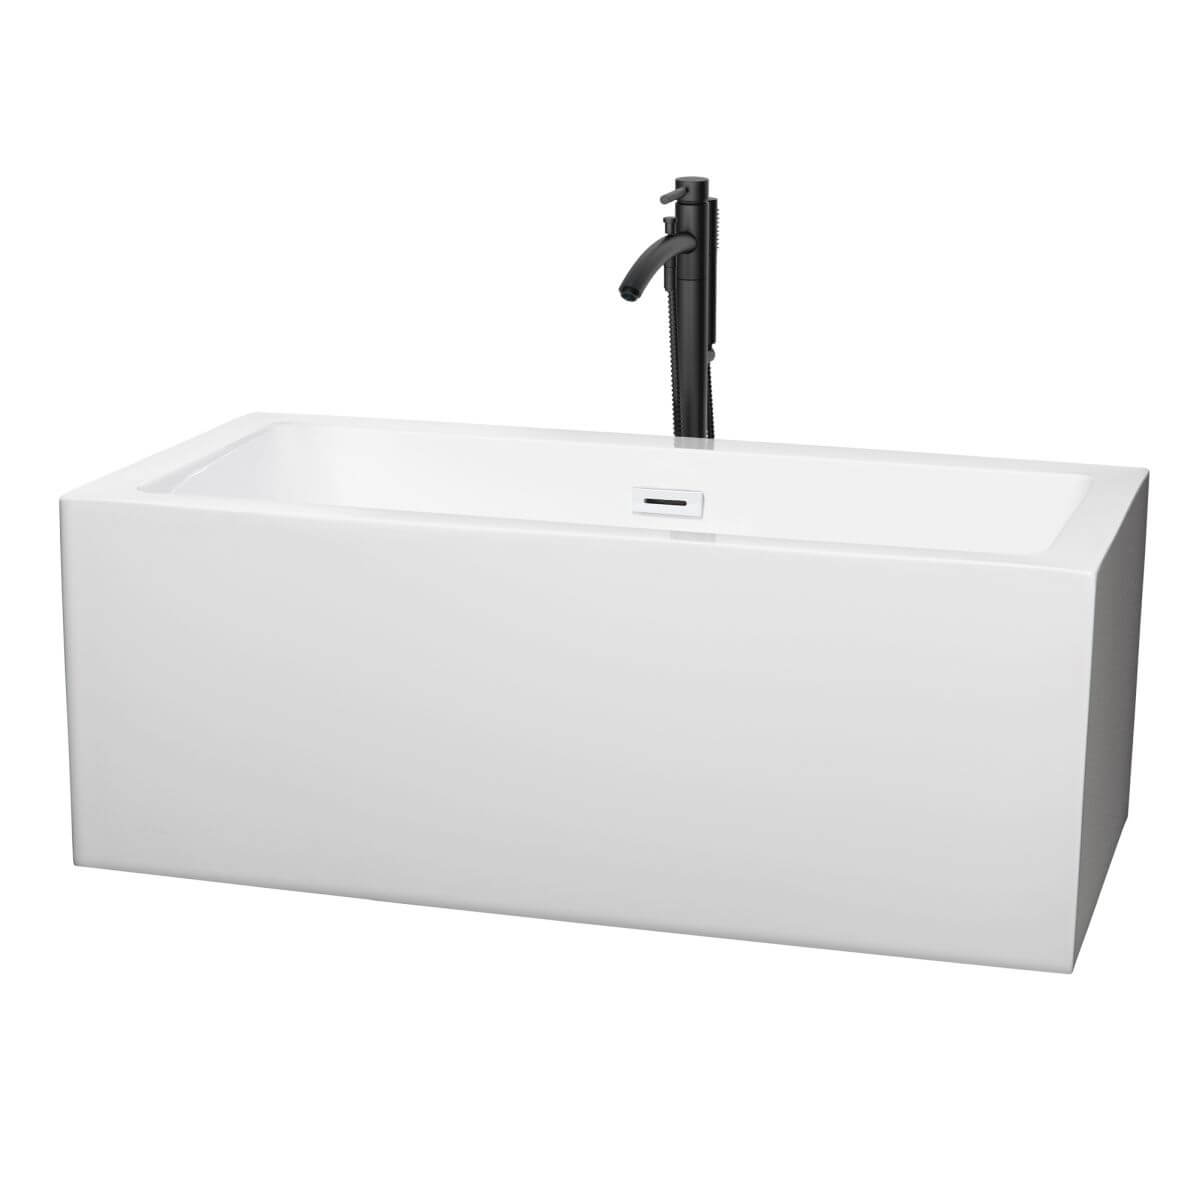 Wyndham Collection Melody 60 inch Freestanding Bathtub in White with Shiny White Trim and Floor Mounted Faucet in Matte Black - WCOBT101160SWATPBK